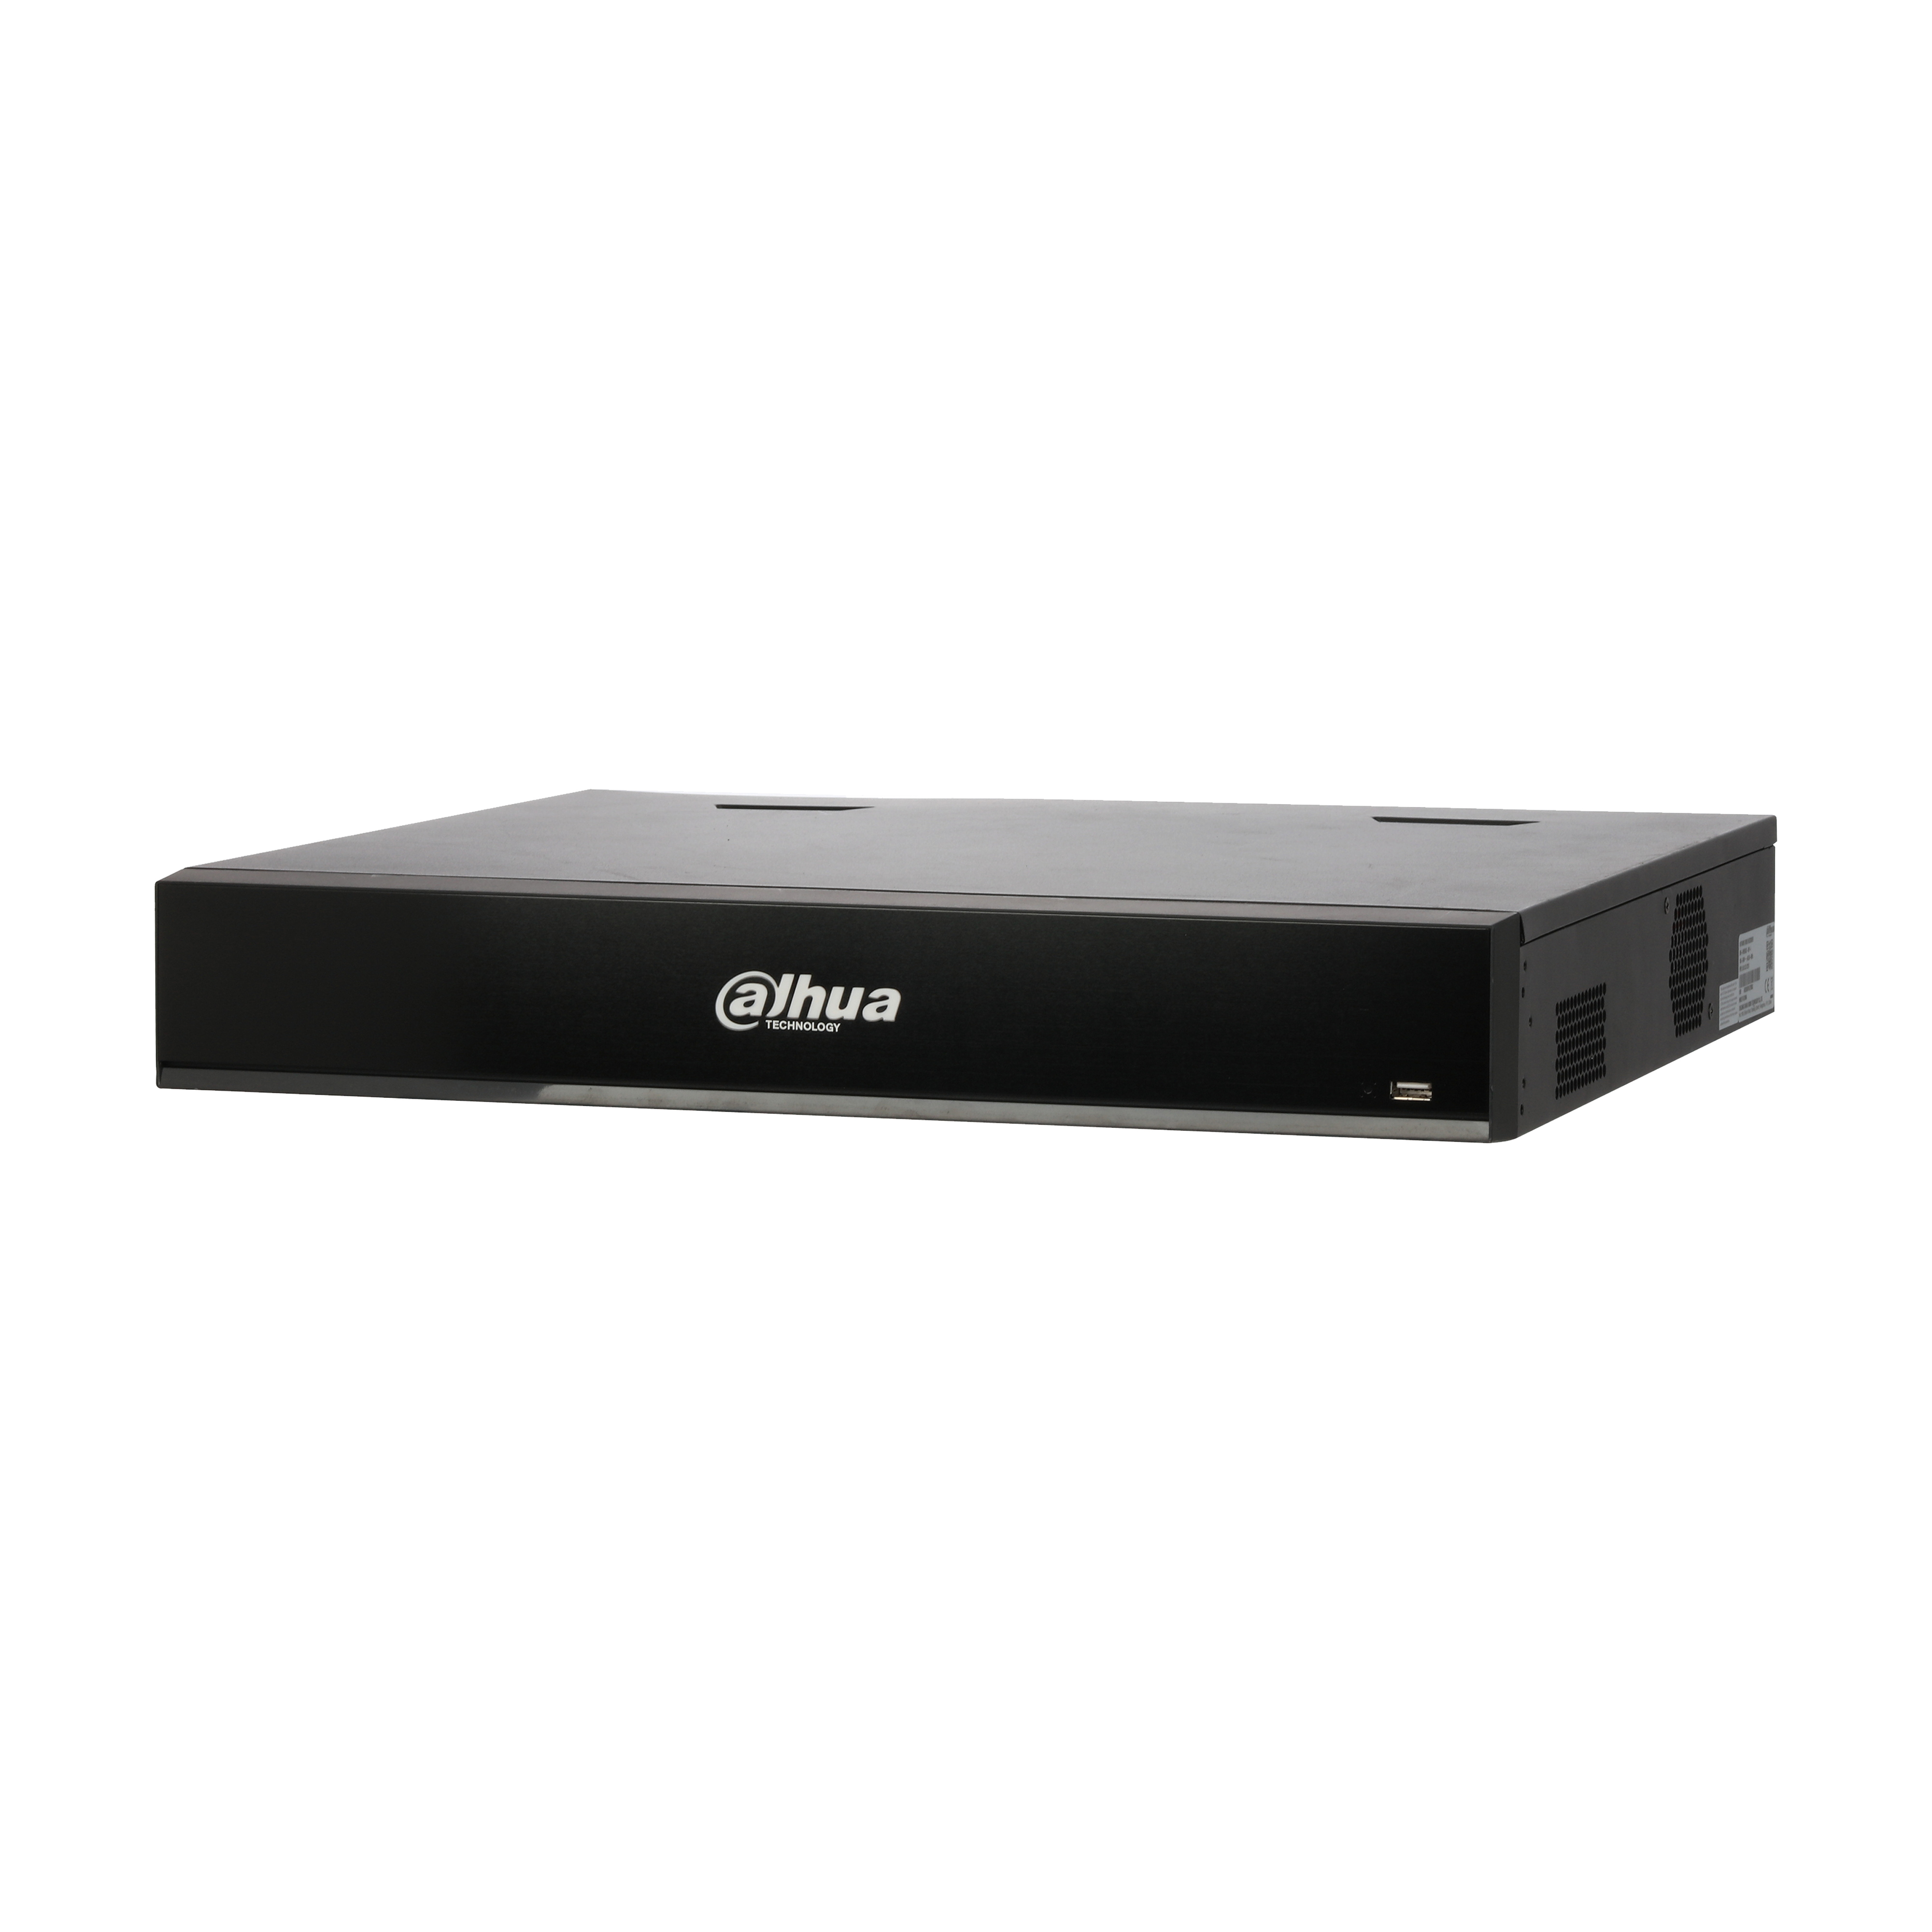 DAHUA NVR5432-16P-I 32Channel 1.5U 4HDDs 16PoE WizMind Network Video Recorder